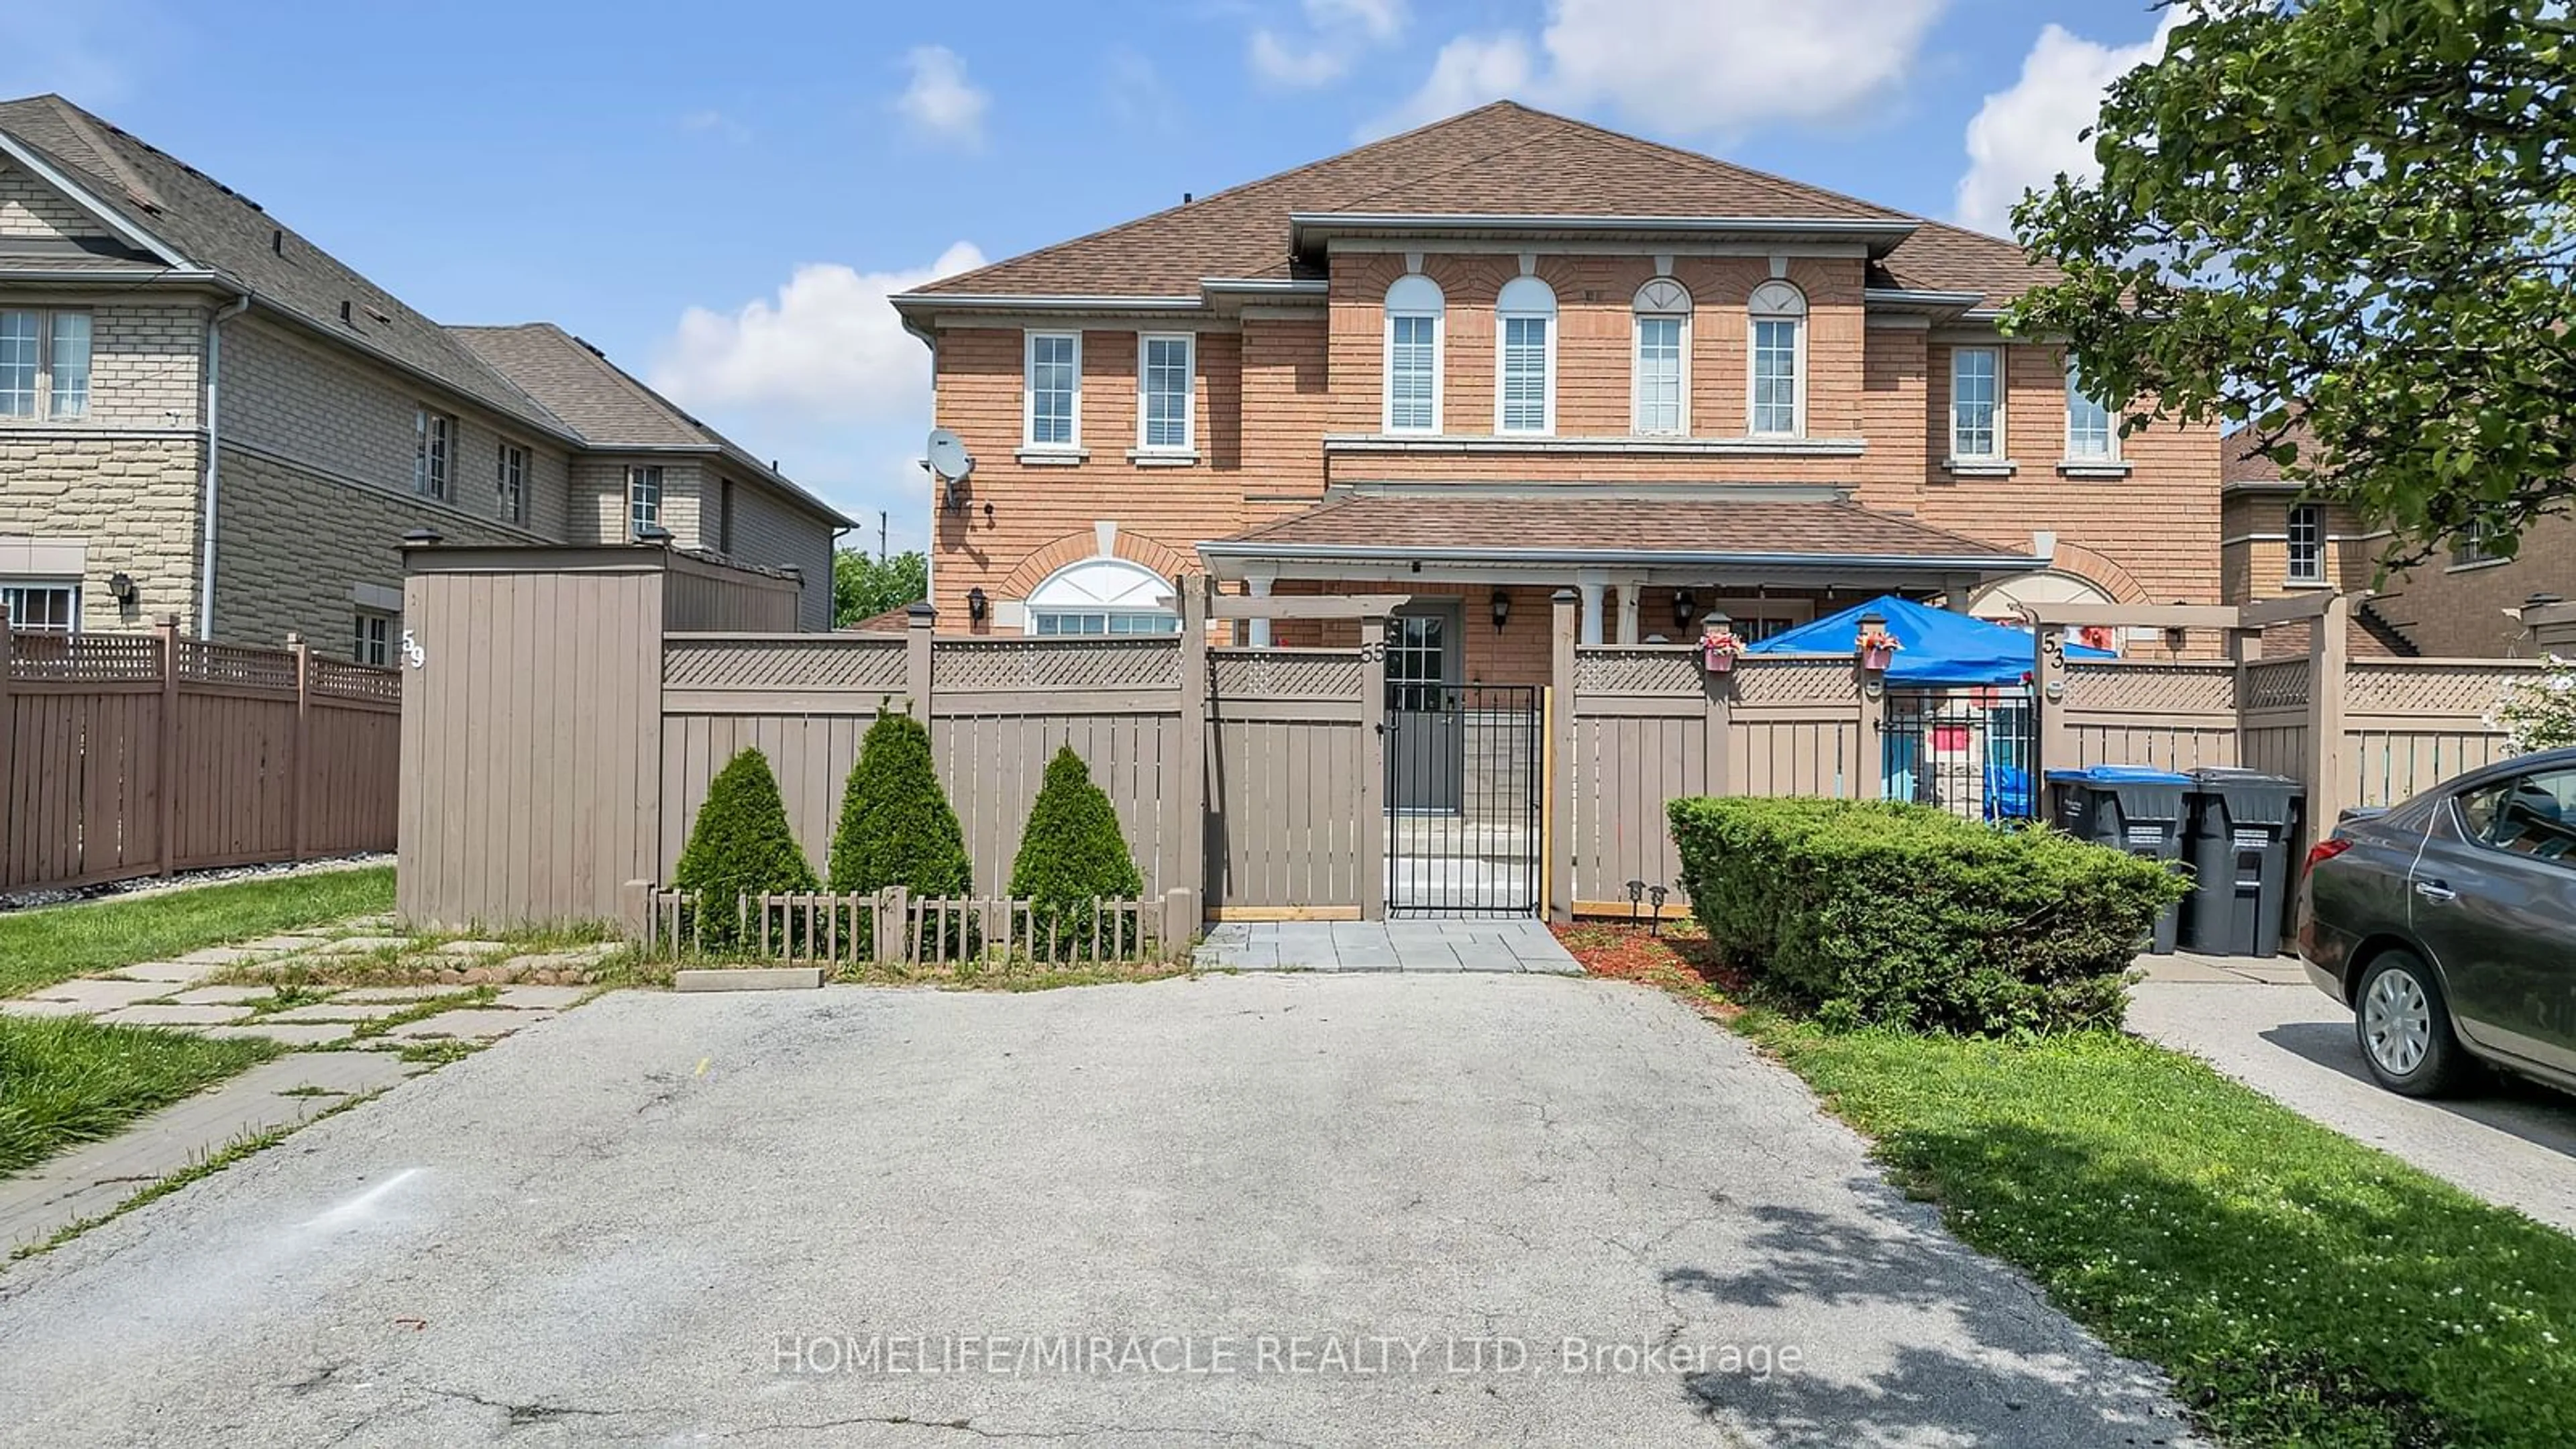 Frontside or backside of a home for 55 Morningmist St, Brampton Ontario L6R 2A6